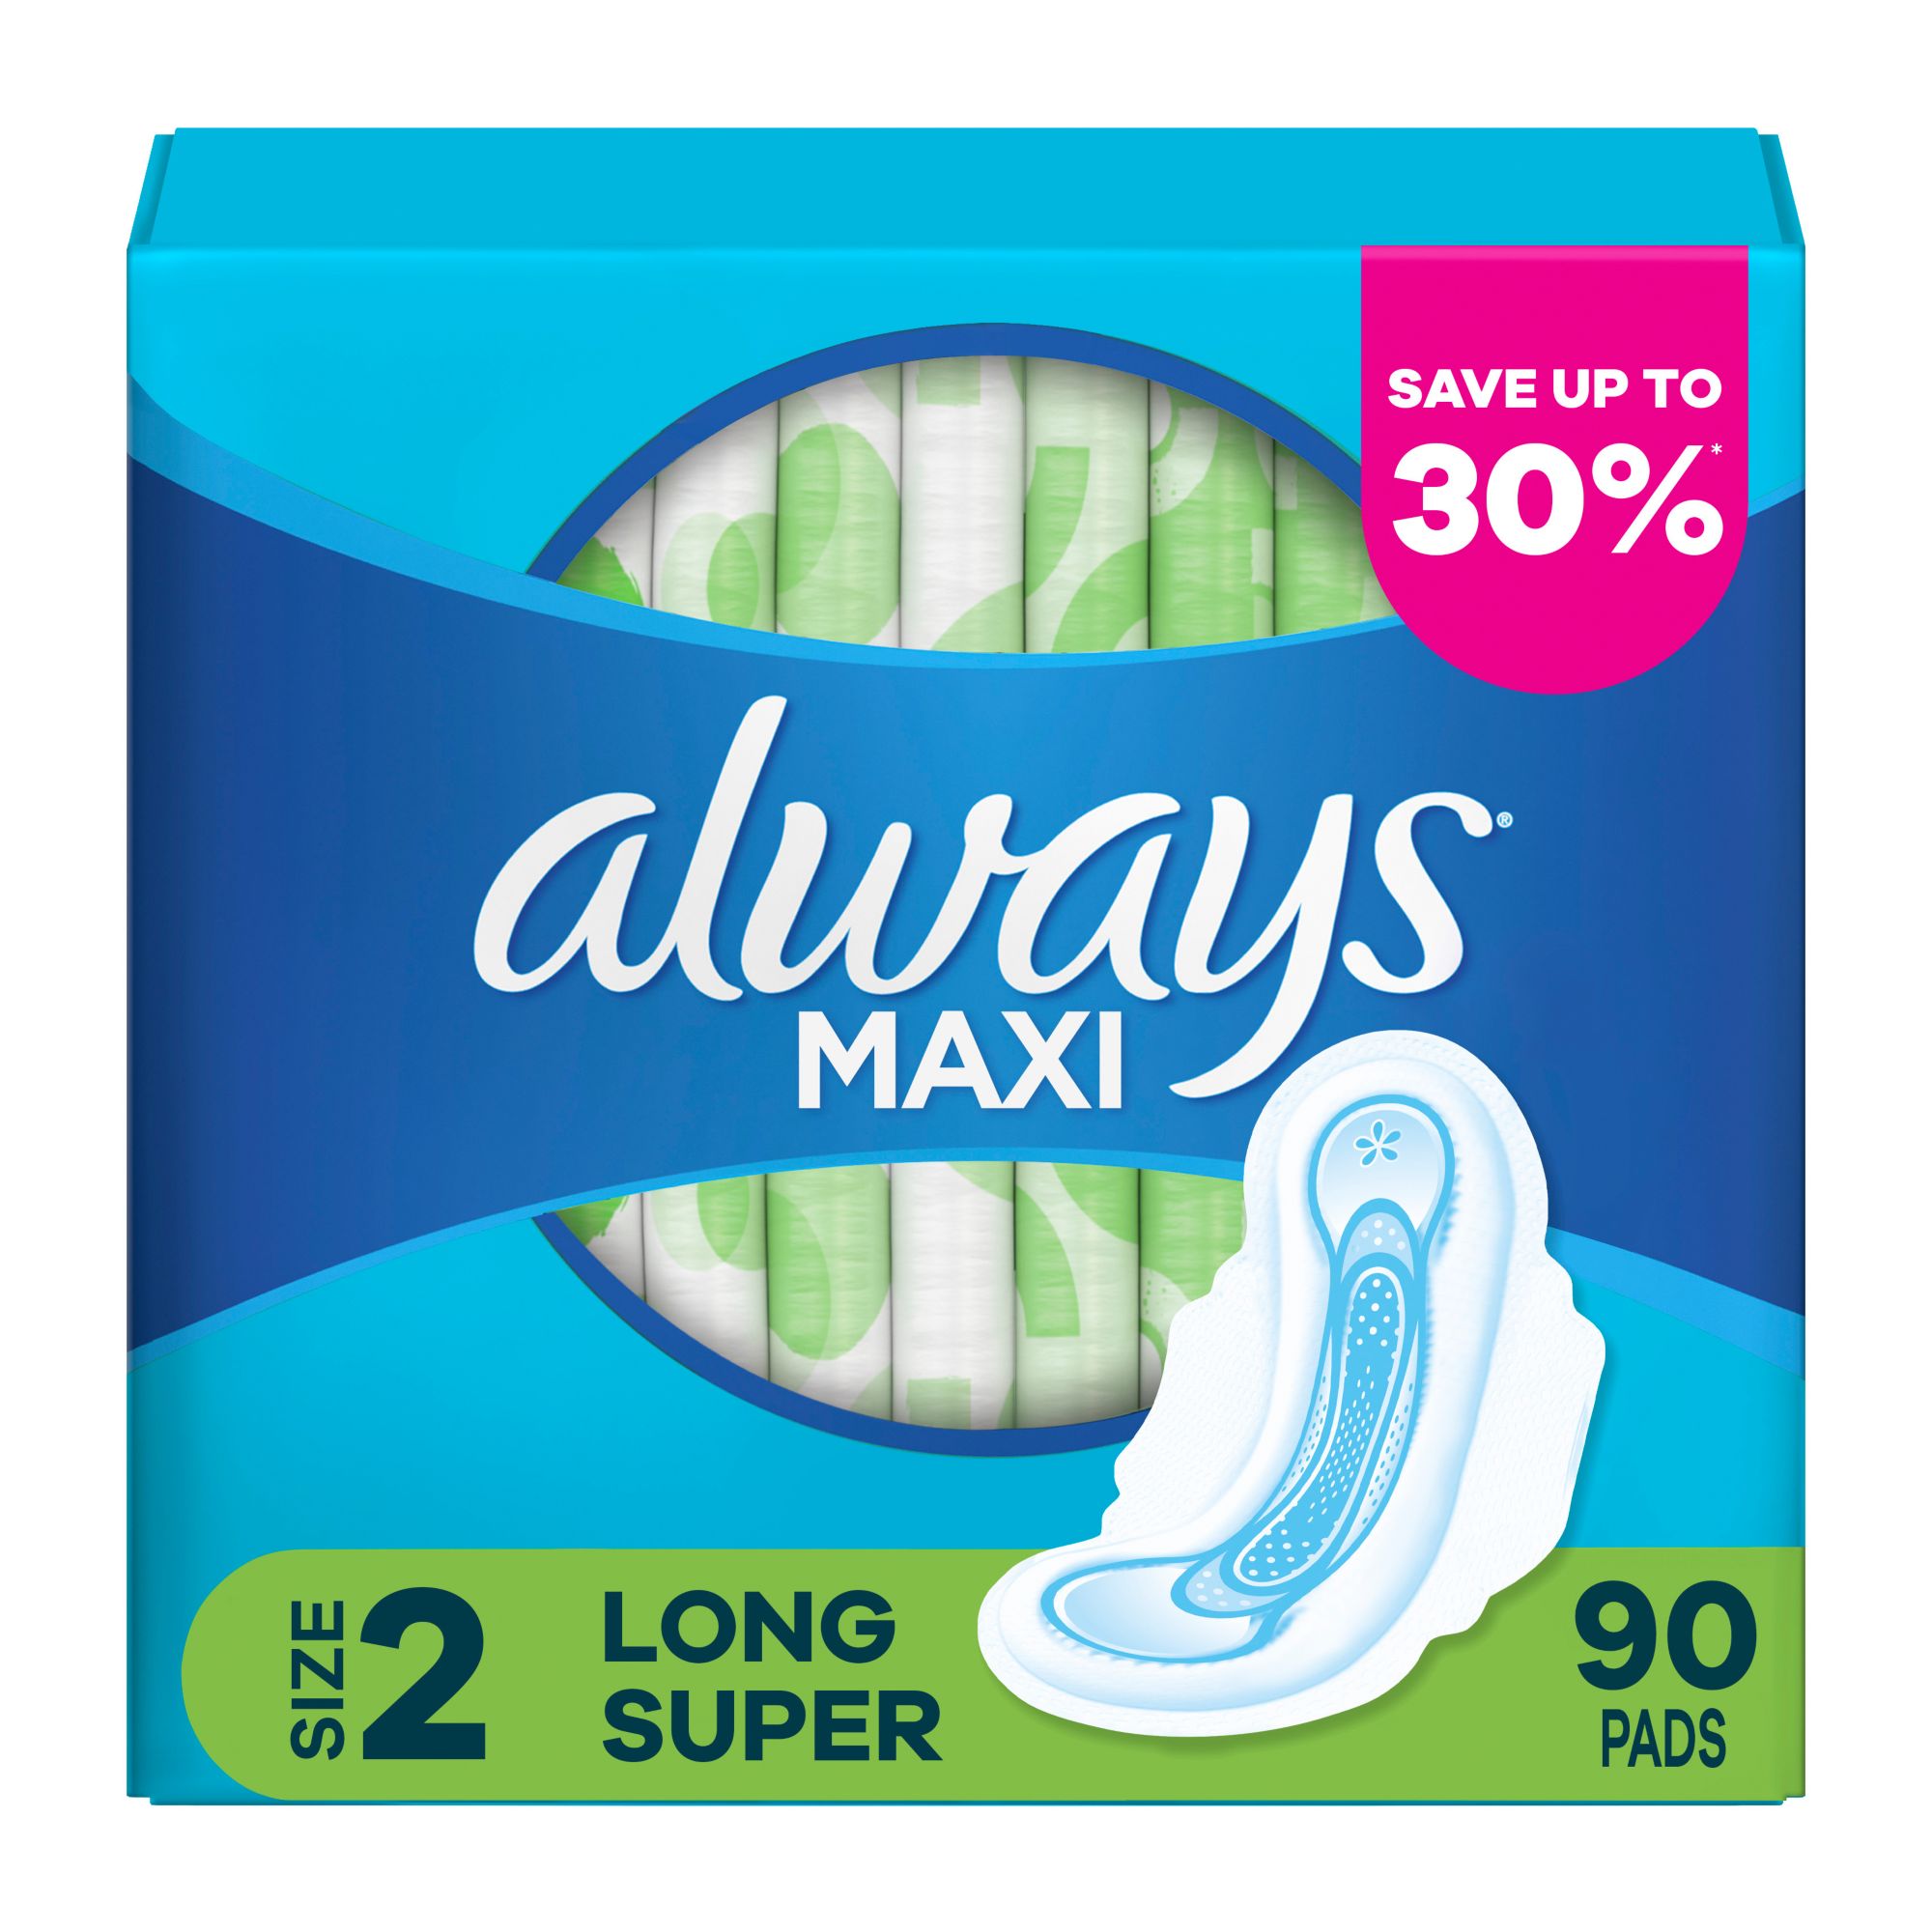 Always Ultra Thin Extra Heavy Overnight Pads with Wings, Size 5, 34 Count